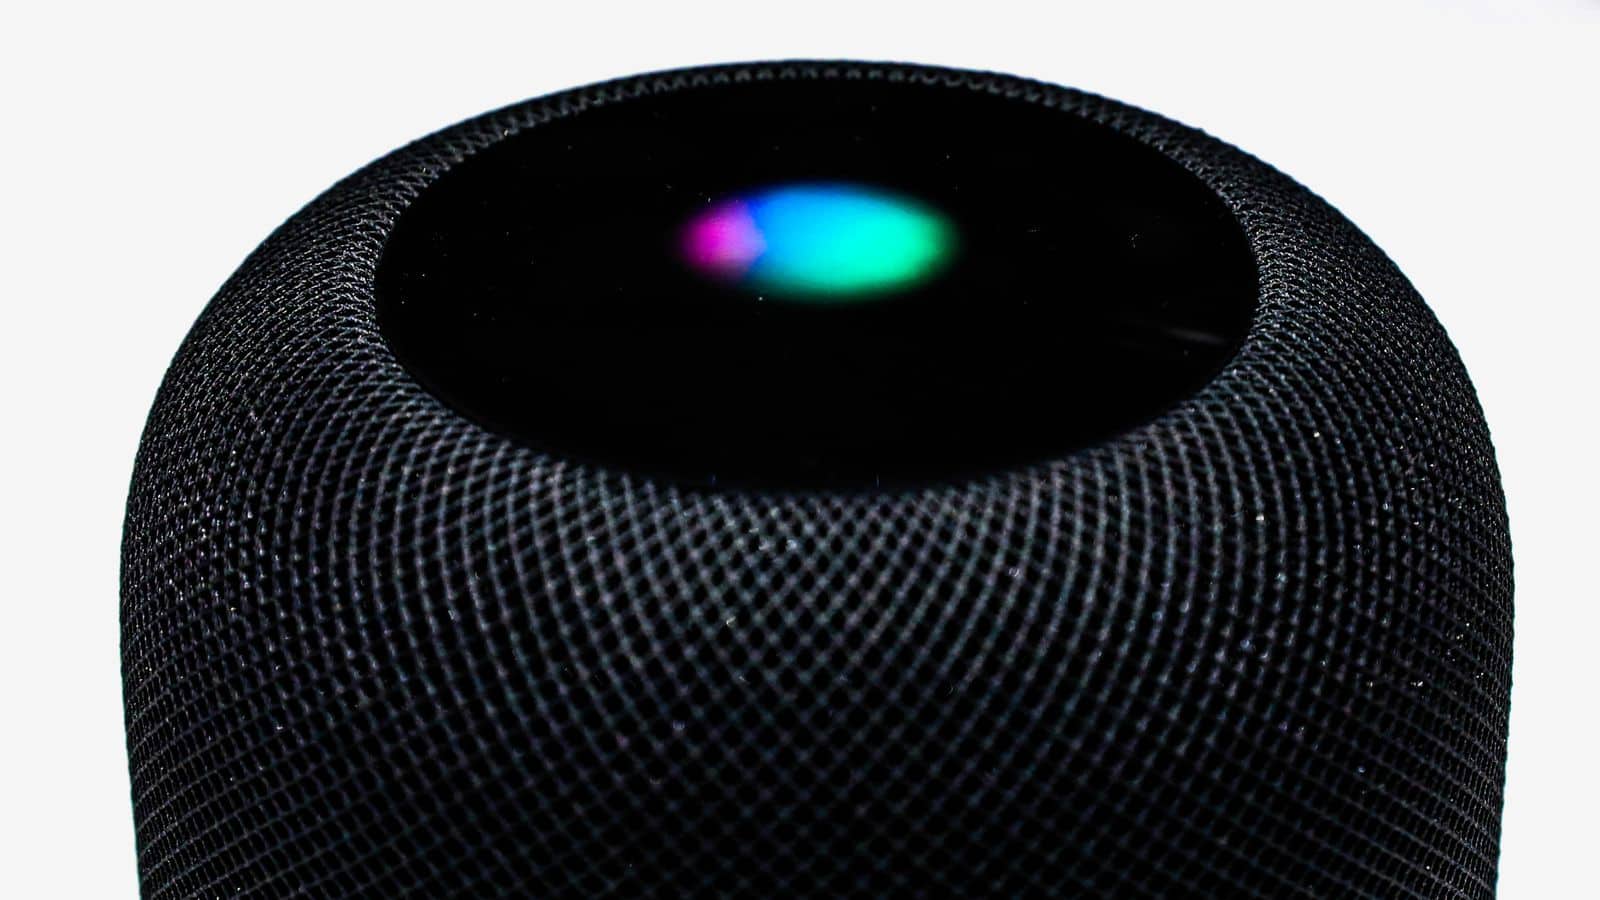 HomePod in China